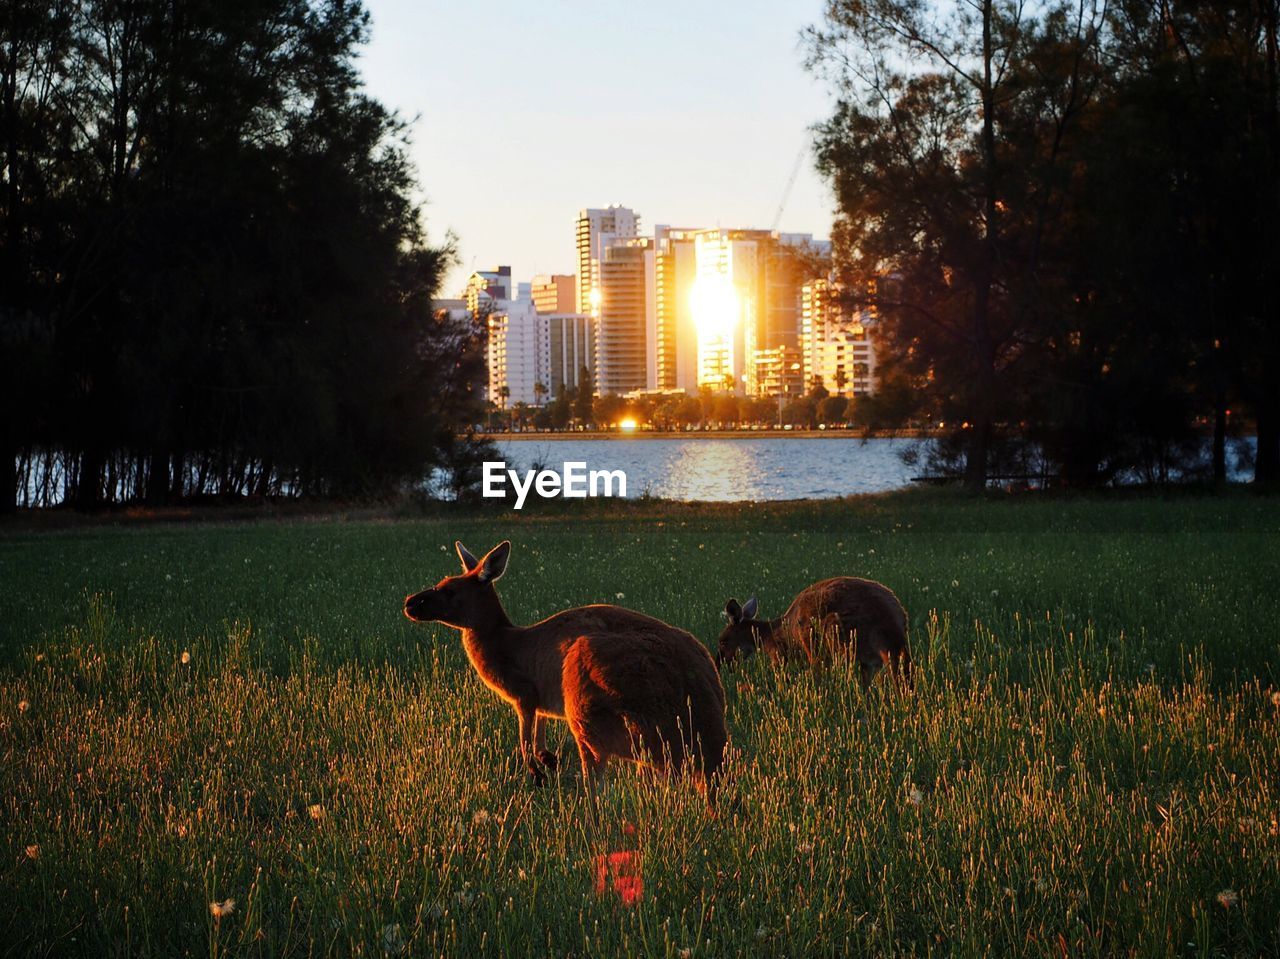 Kangaroos on grassy field by city against clear sky at sunset